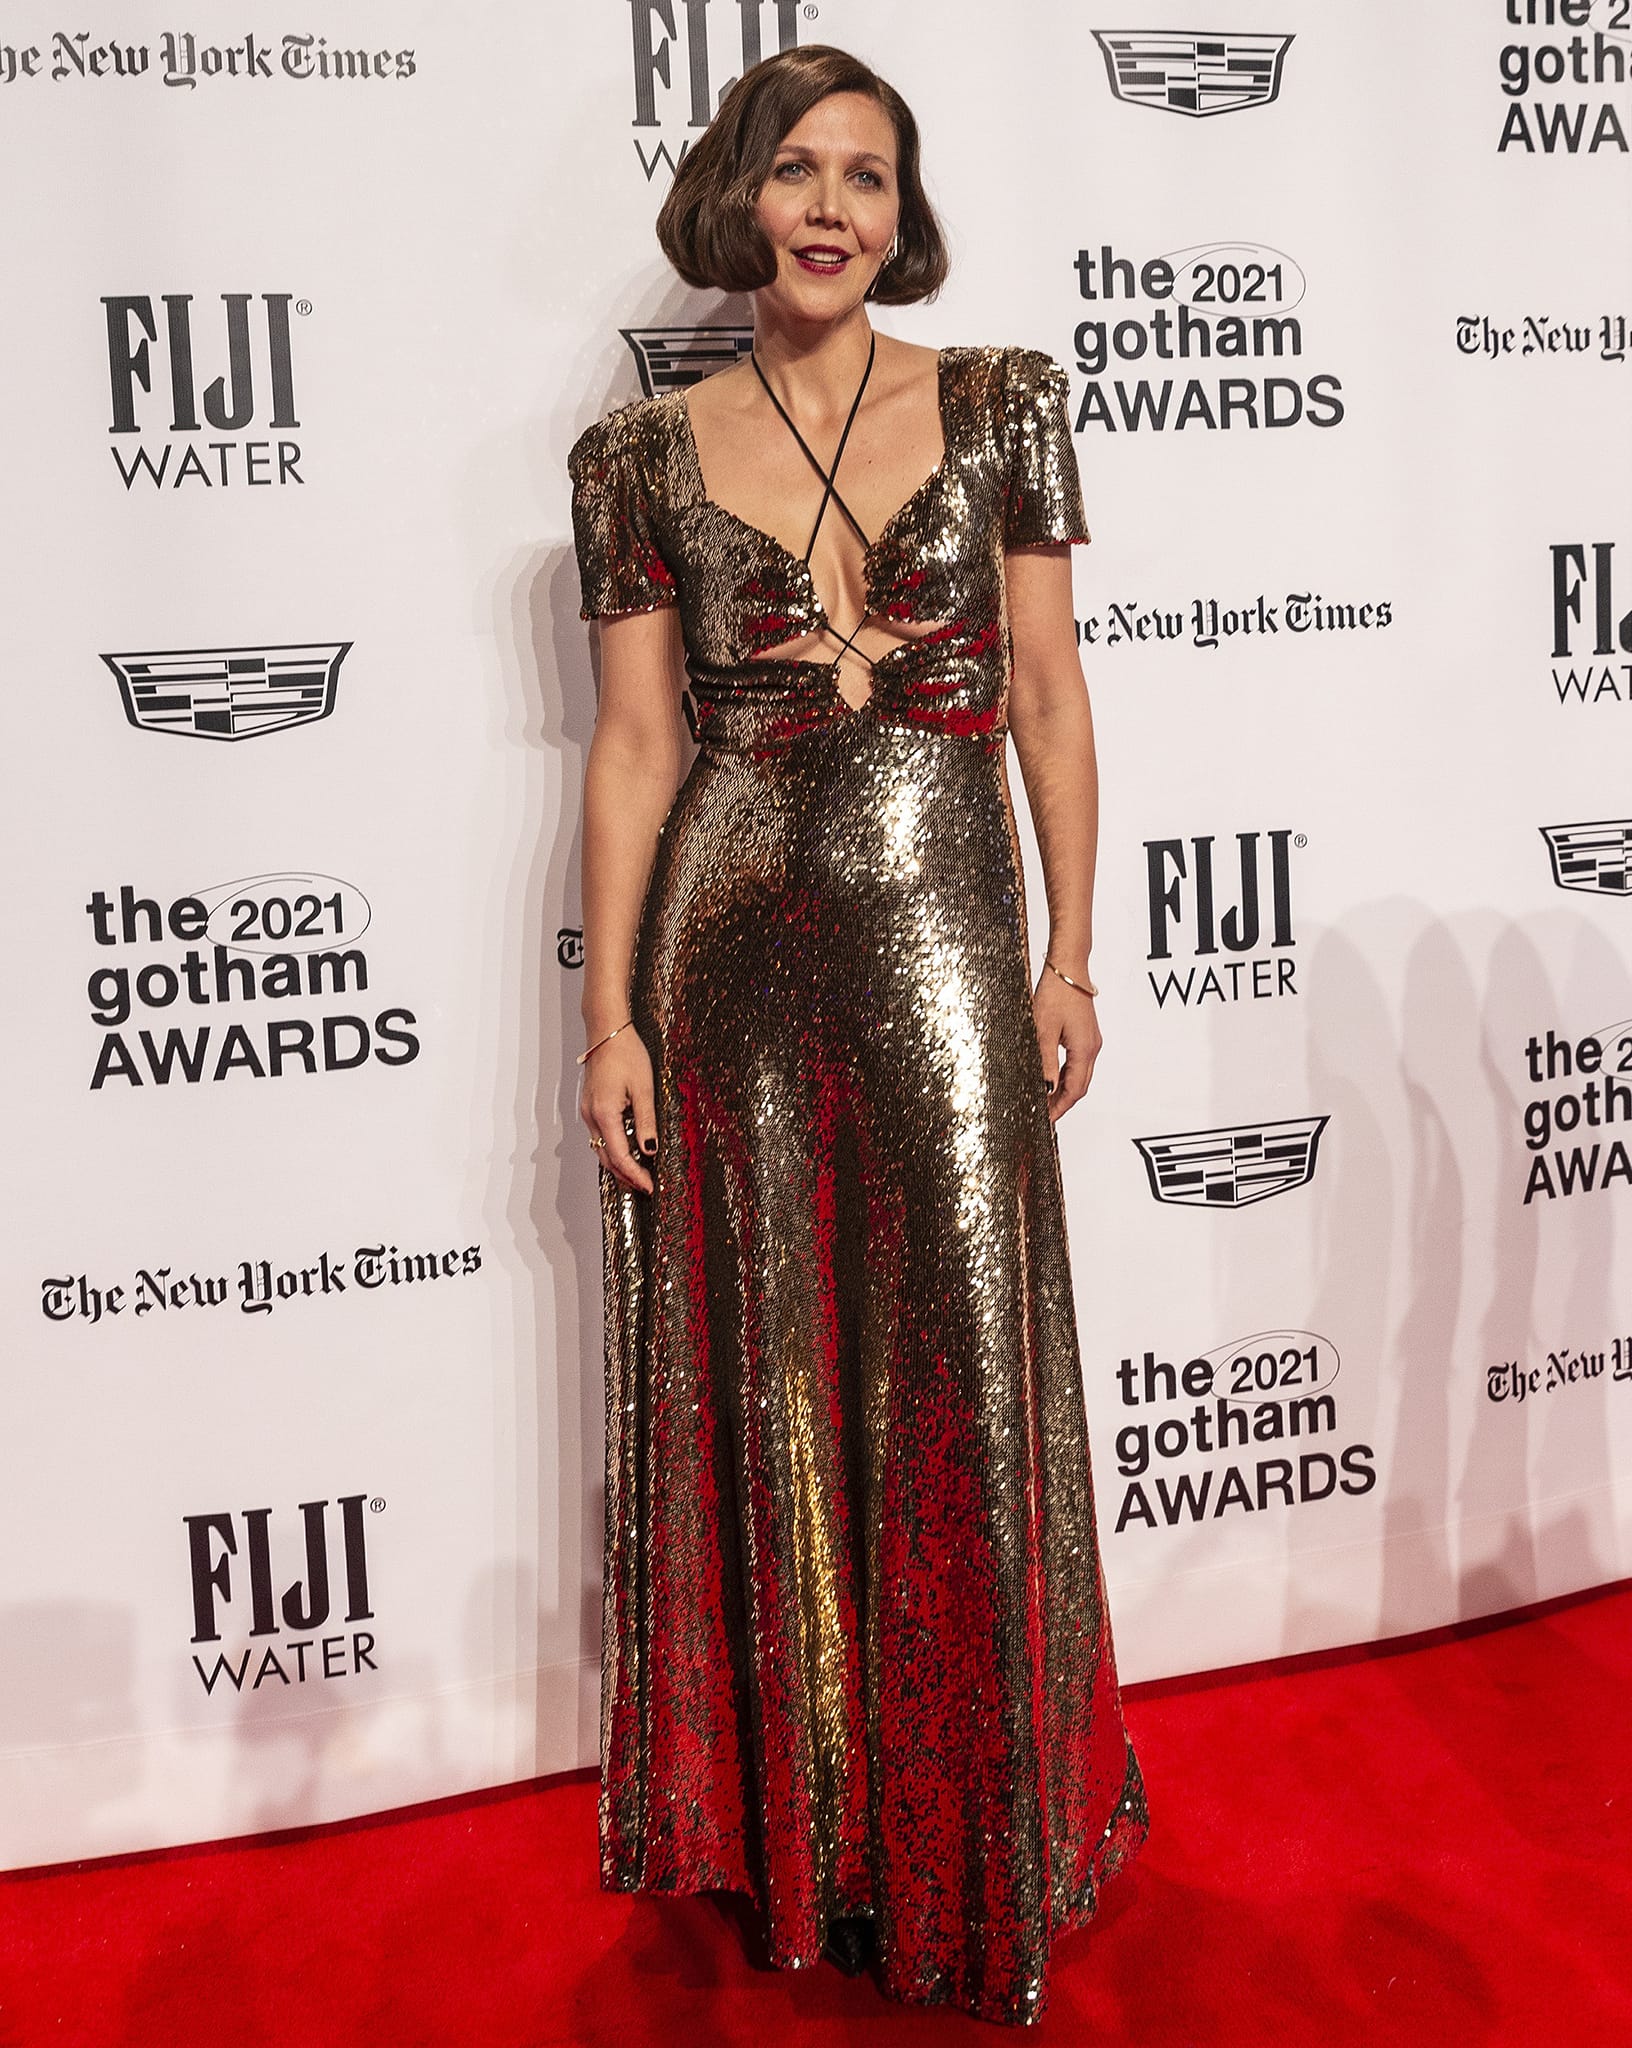 Maggie Gyllenhaal showcases cleavage and underboob in a gold sequin Rodarte Fall 2021 gown